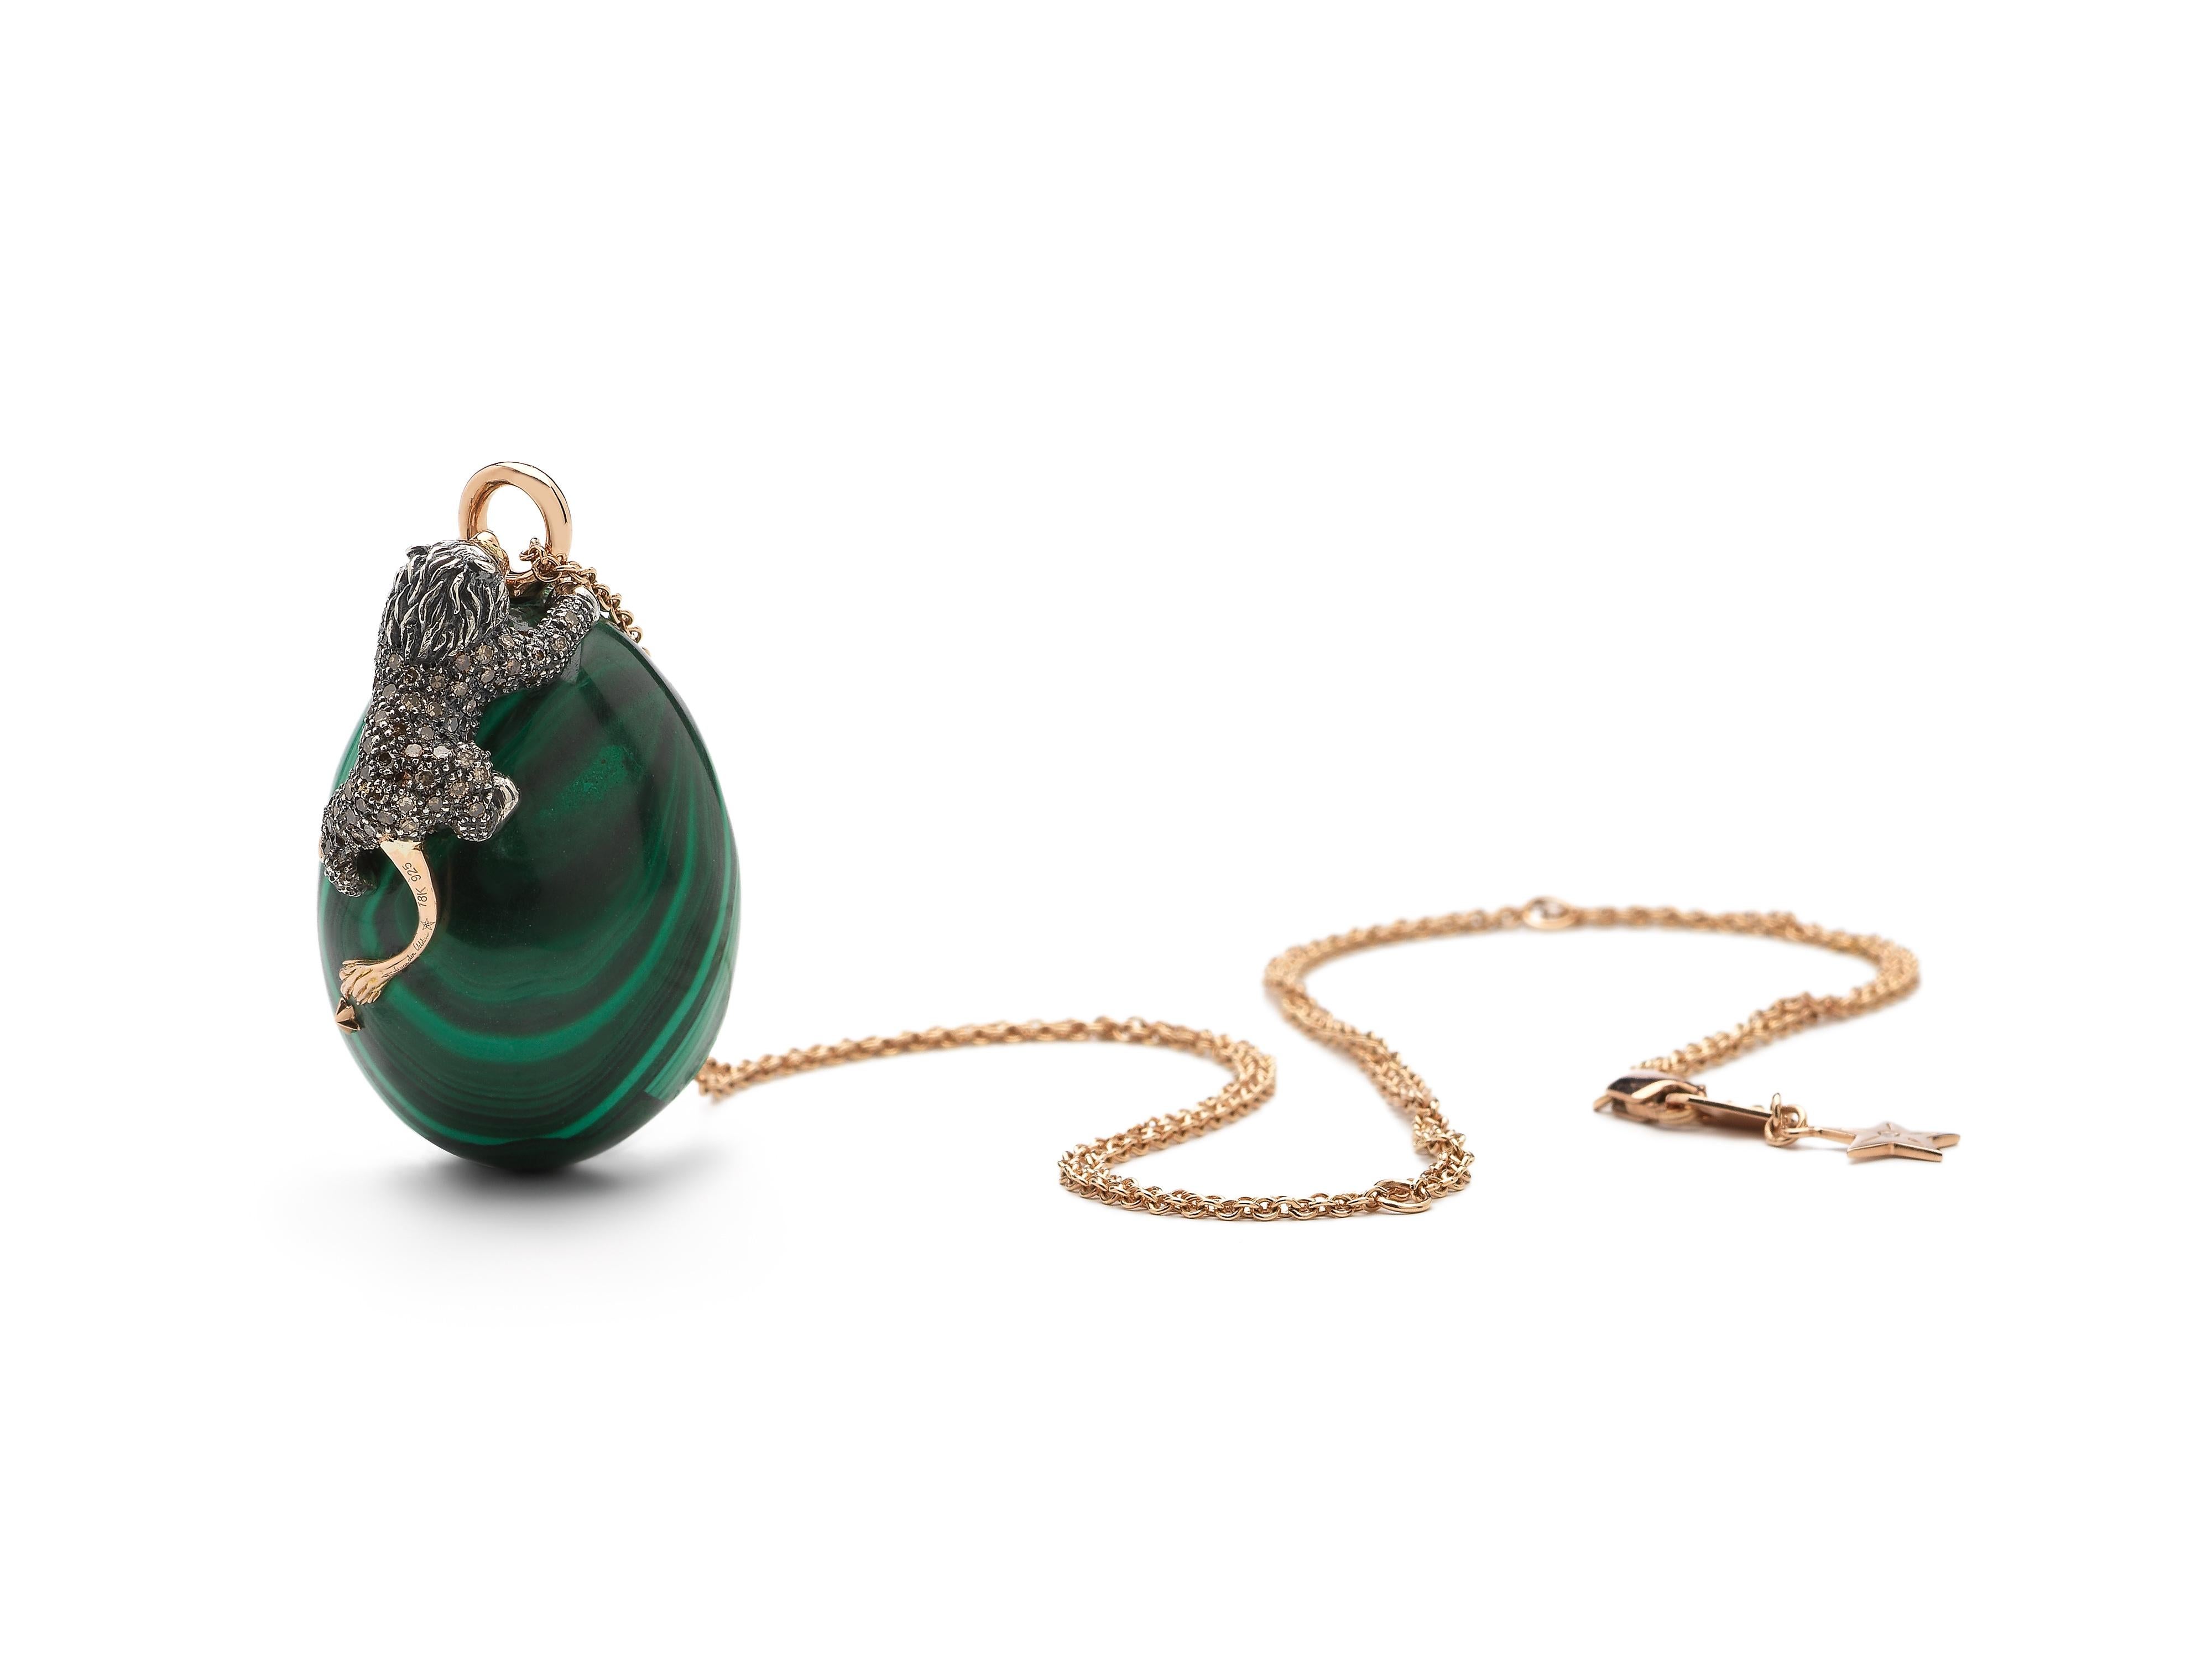 A mesmerizing piece of malachite, a stone prized for protecting and absorbing negative energy, is the focal point of this pendant necklace. The stone is embellished with 18k rose gold stars, and a lion crafted in 18k rose gold and sterling silver.